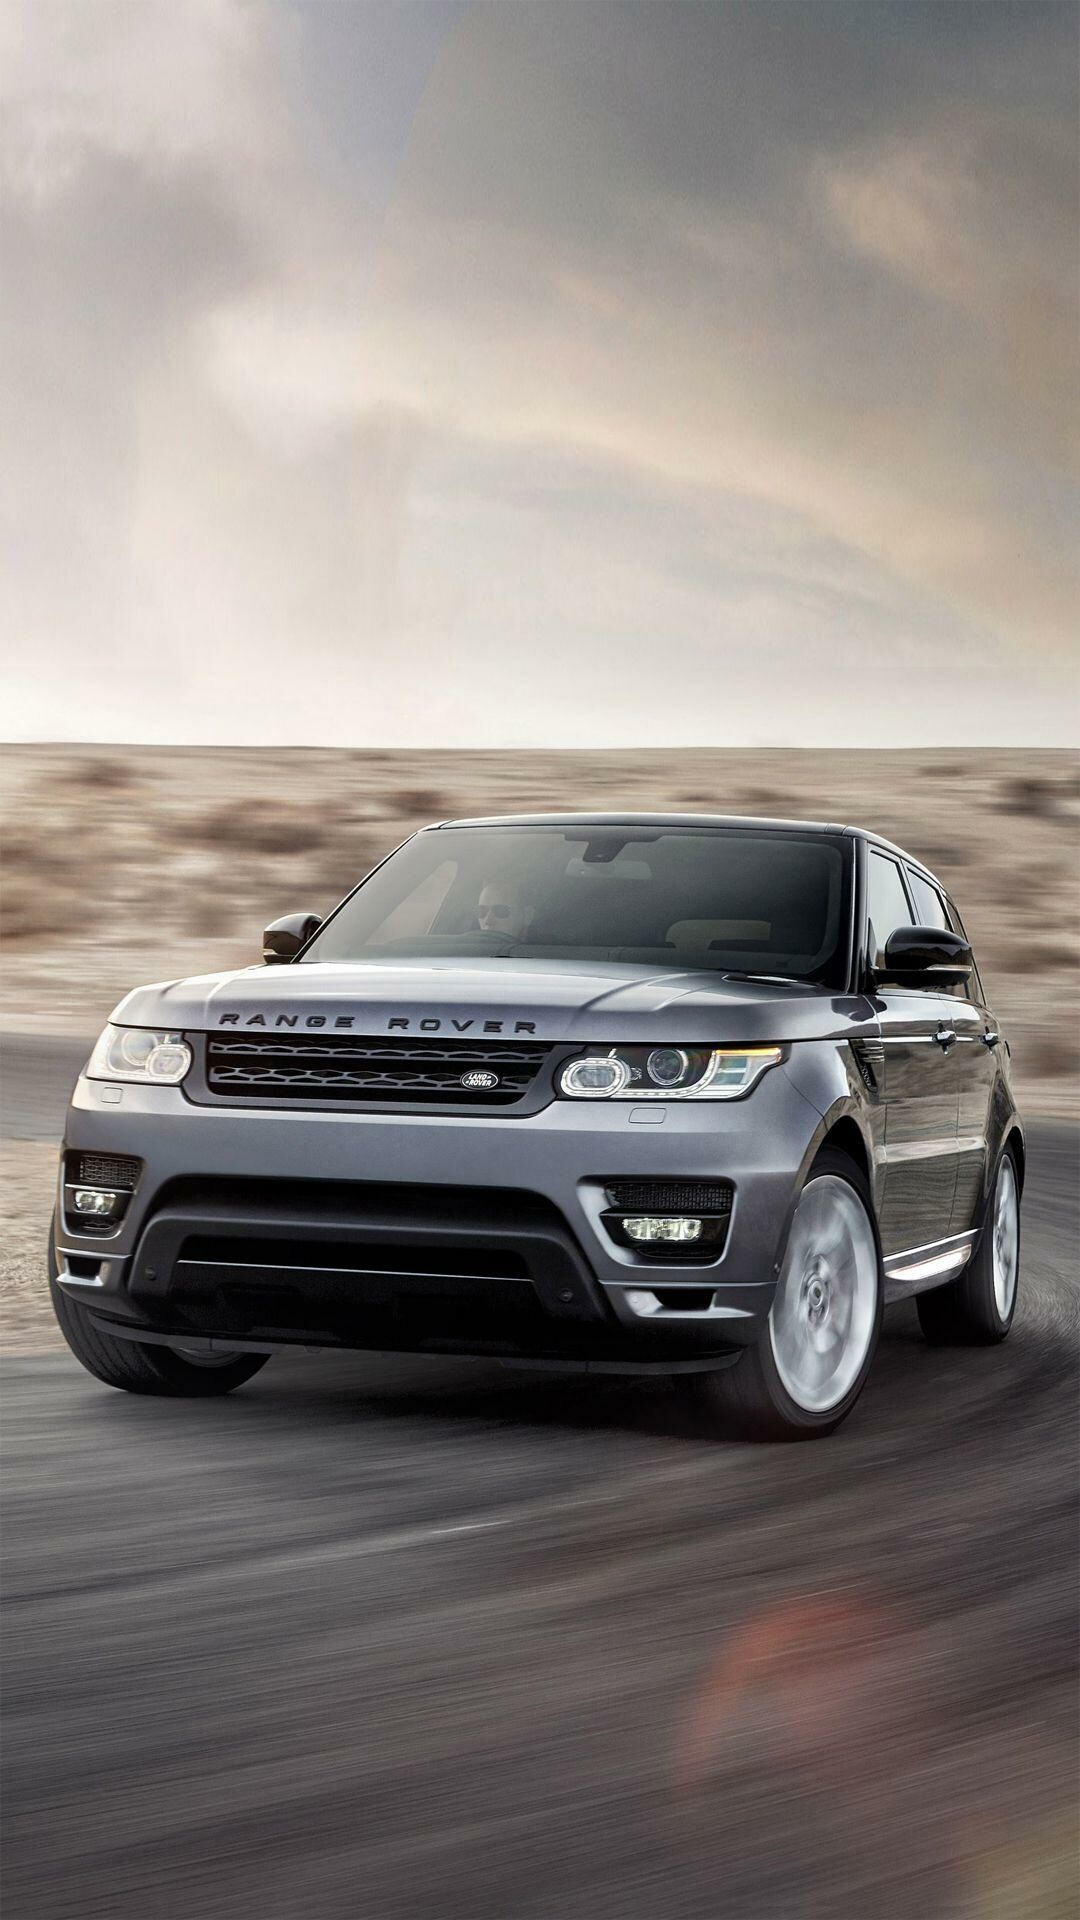 Range Rover: The marque includes models such as Sport, Evoque, and Velar. 1080x1920 Full HD Background.